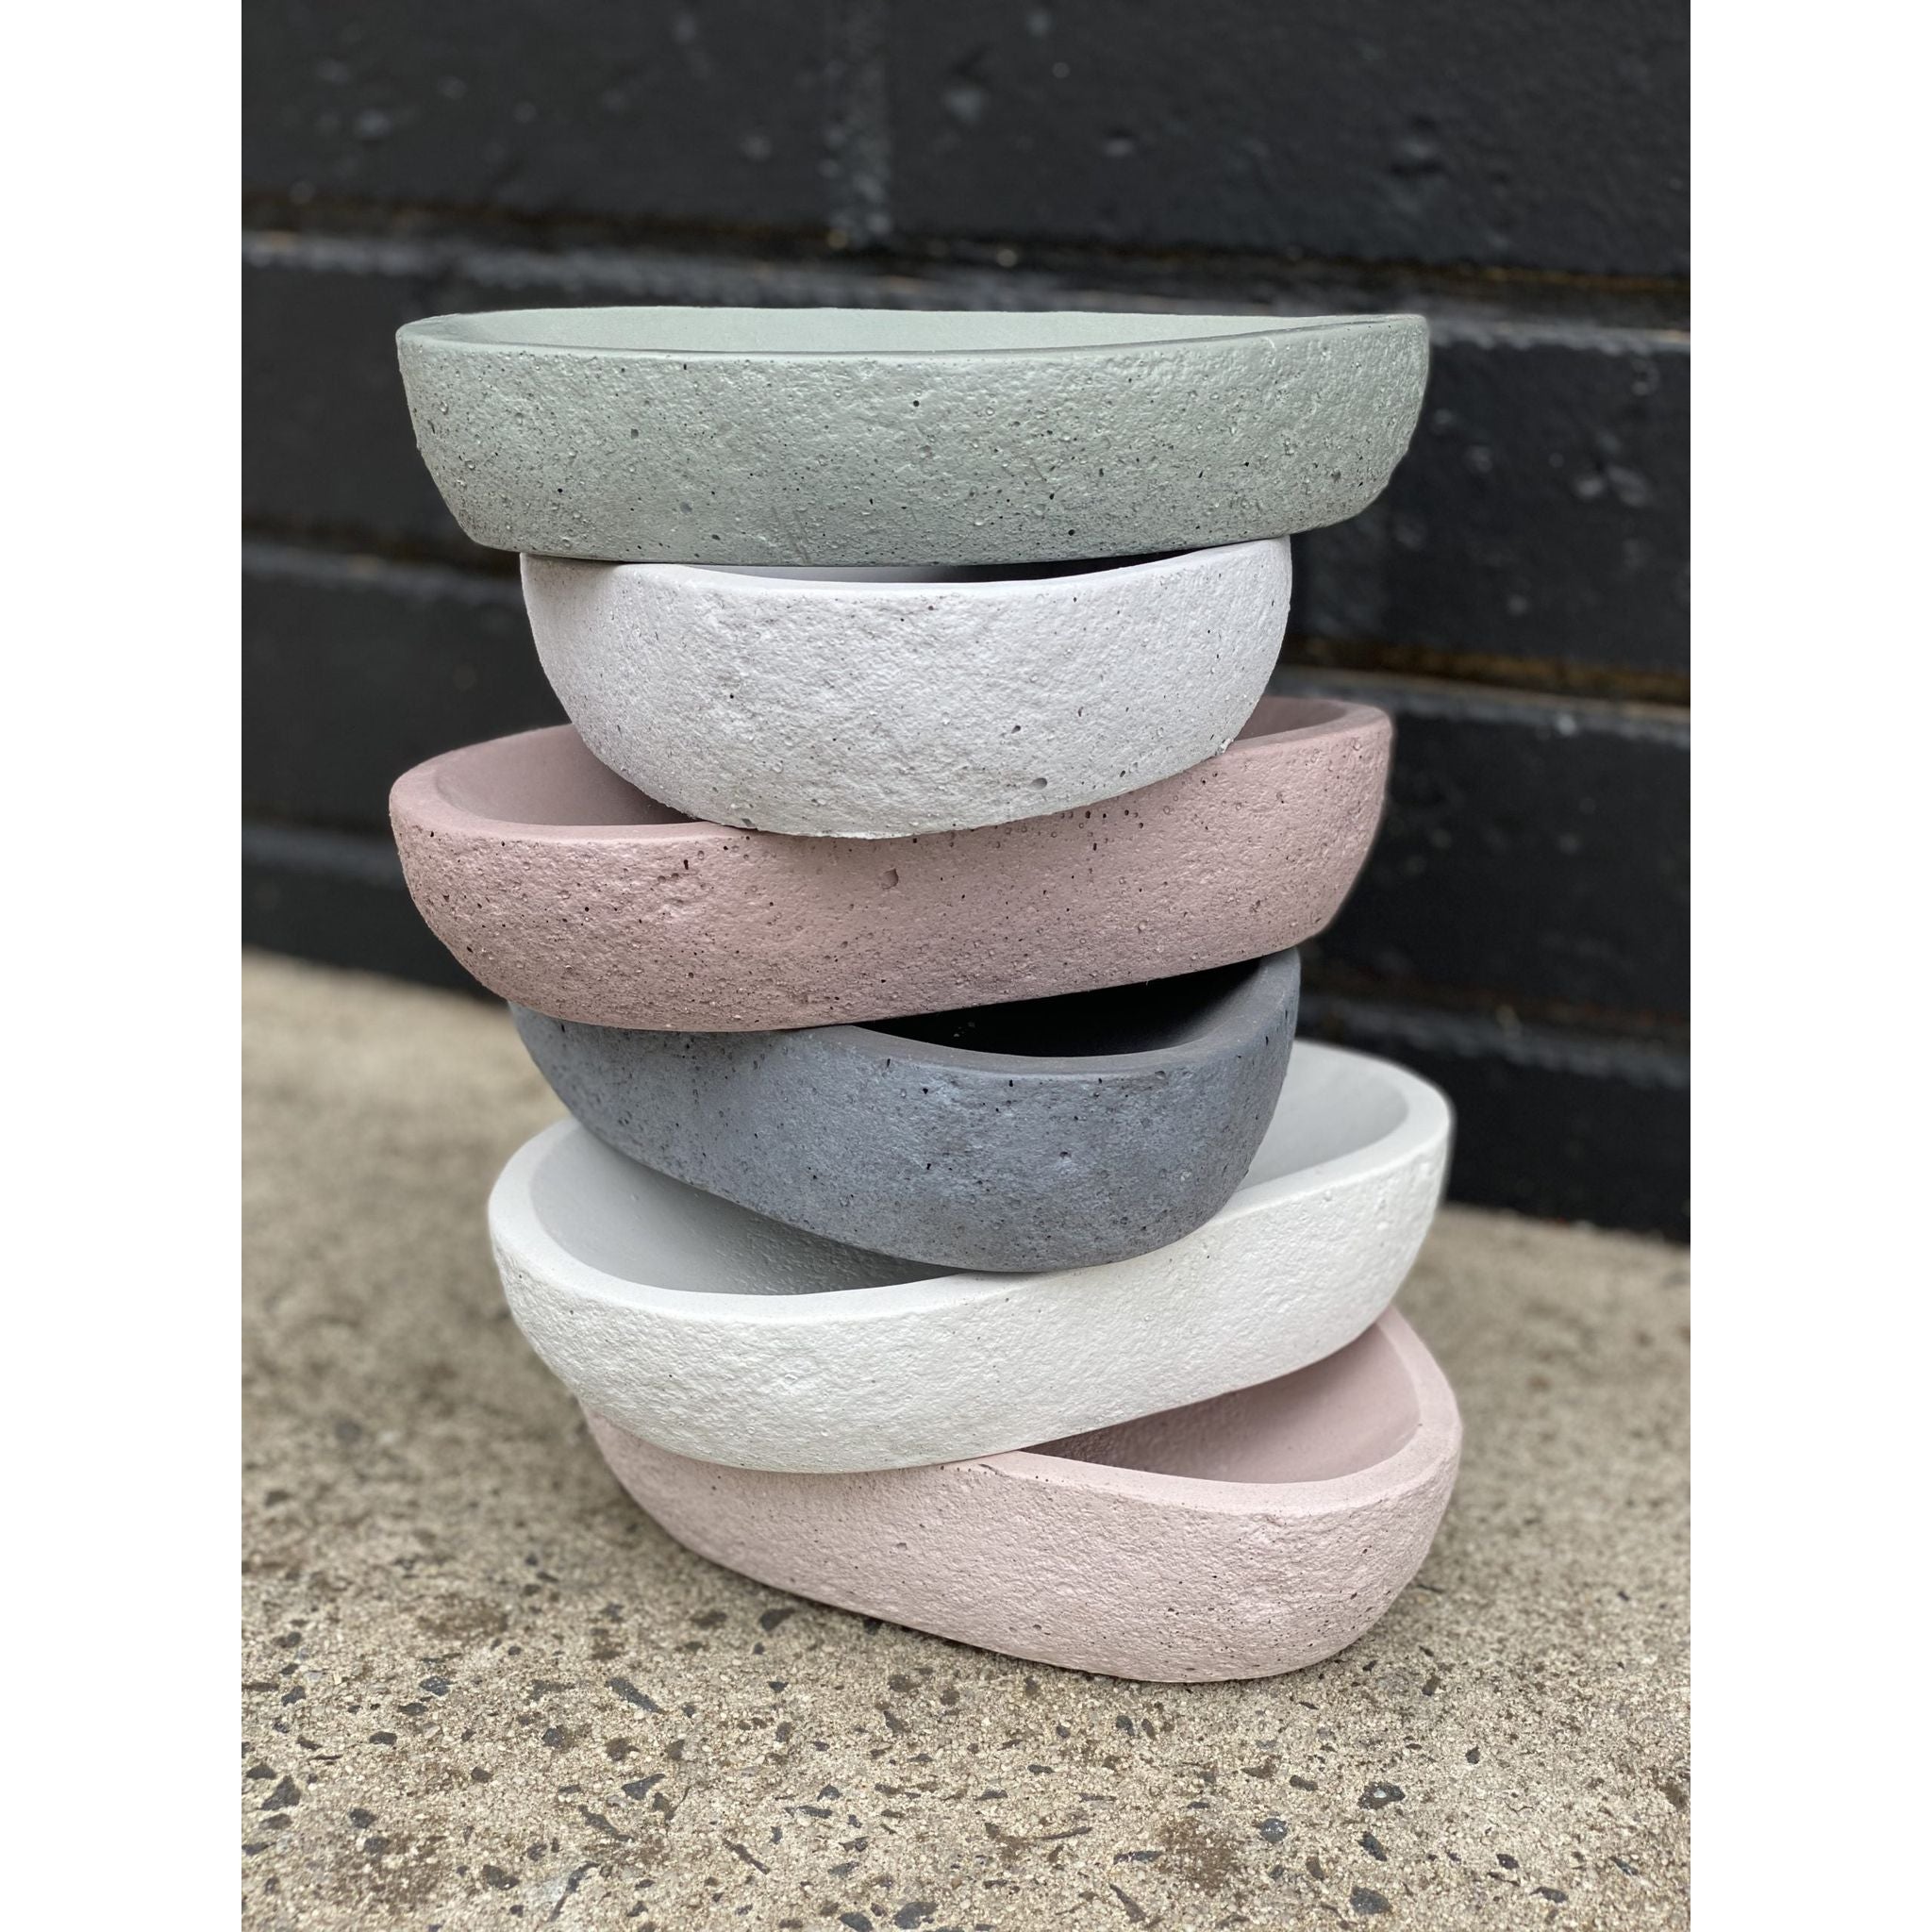 Concrete Bathroom Soap Dish – Made to Order with your Basin